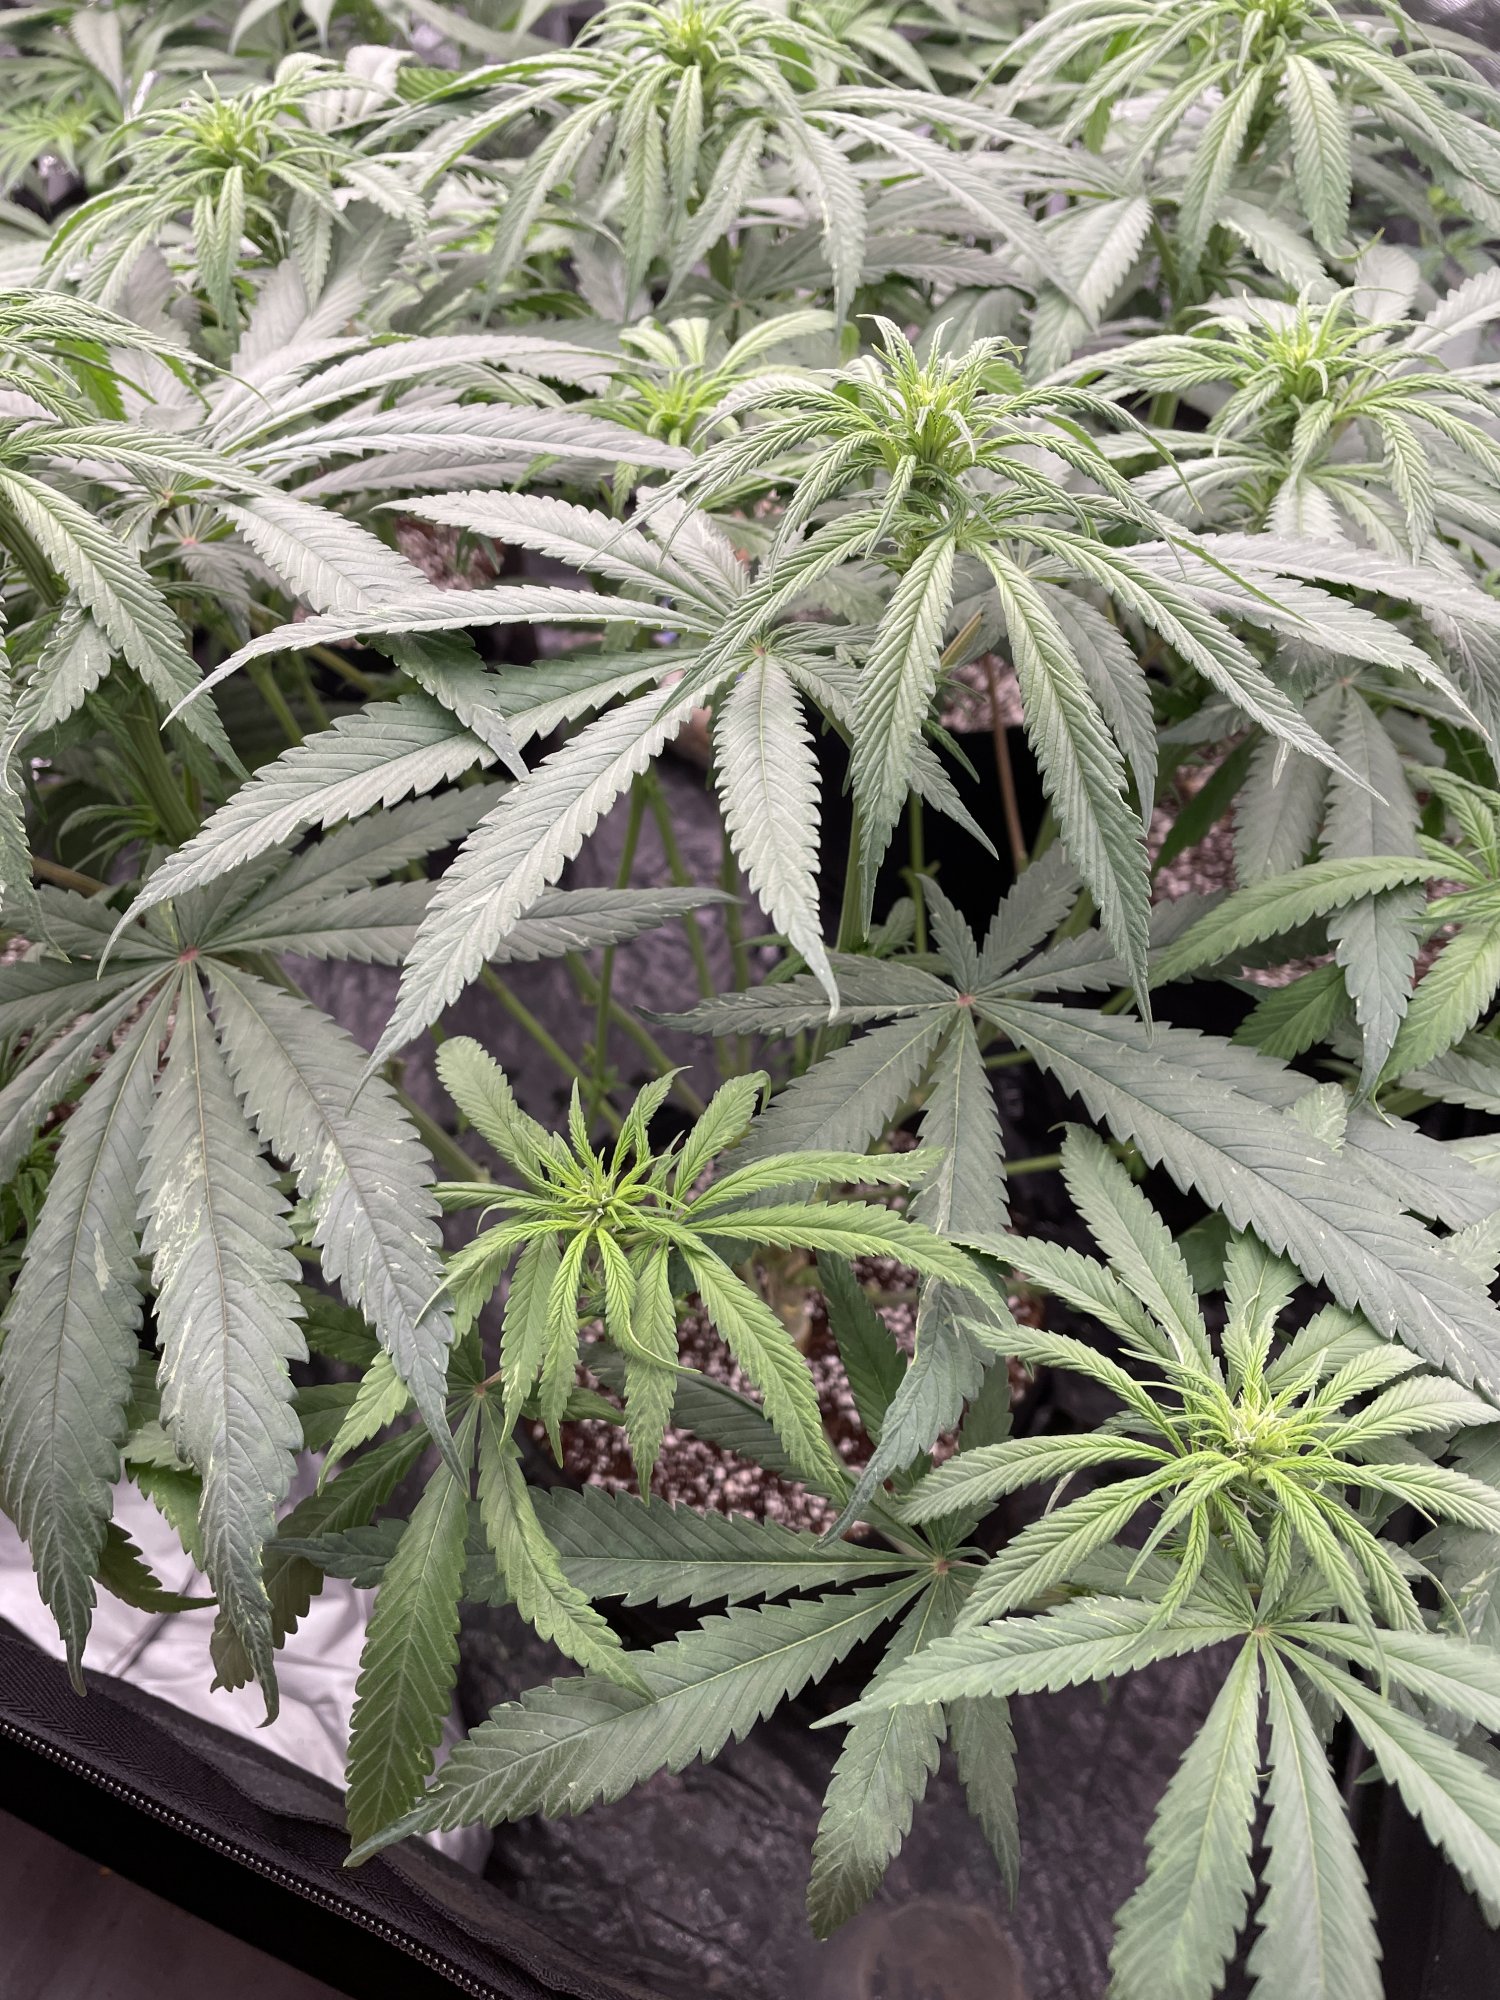 Skinny fan leaves and white marks need some advice 3